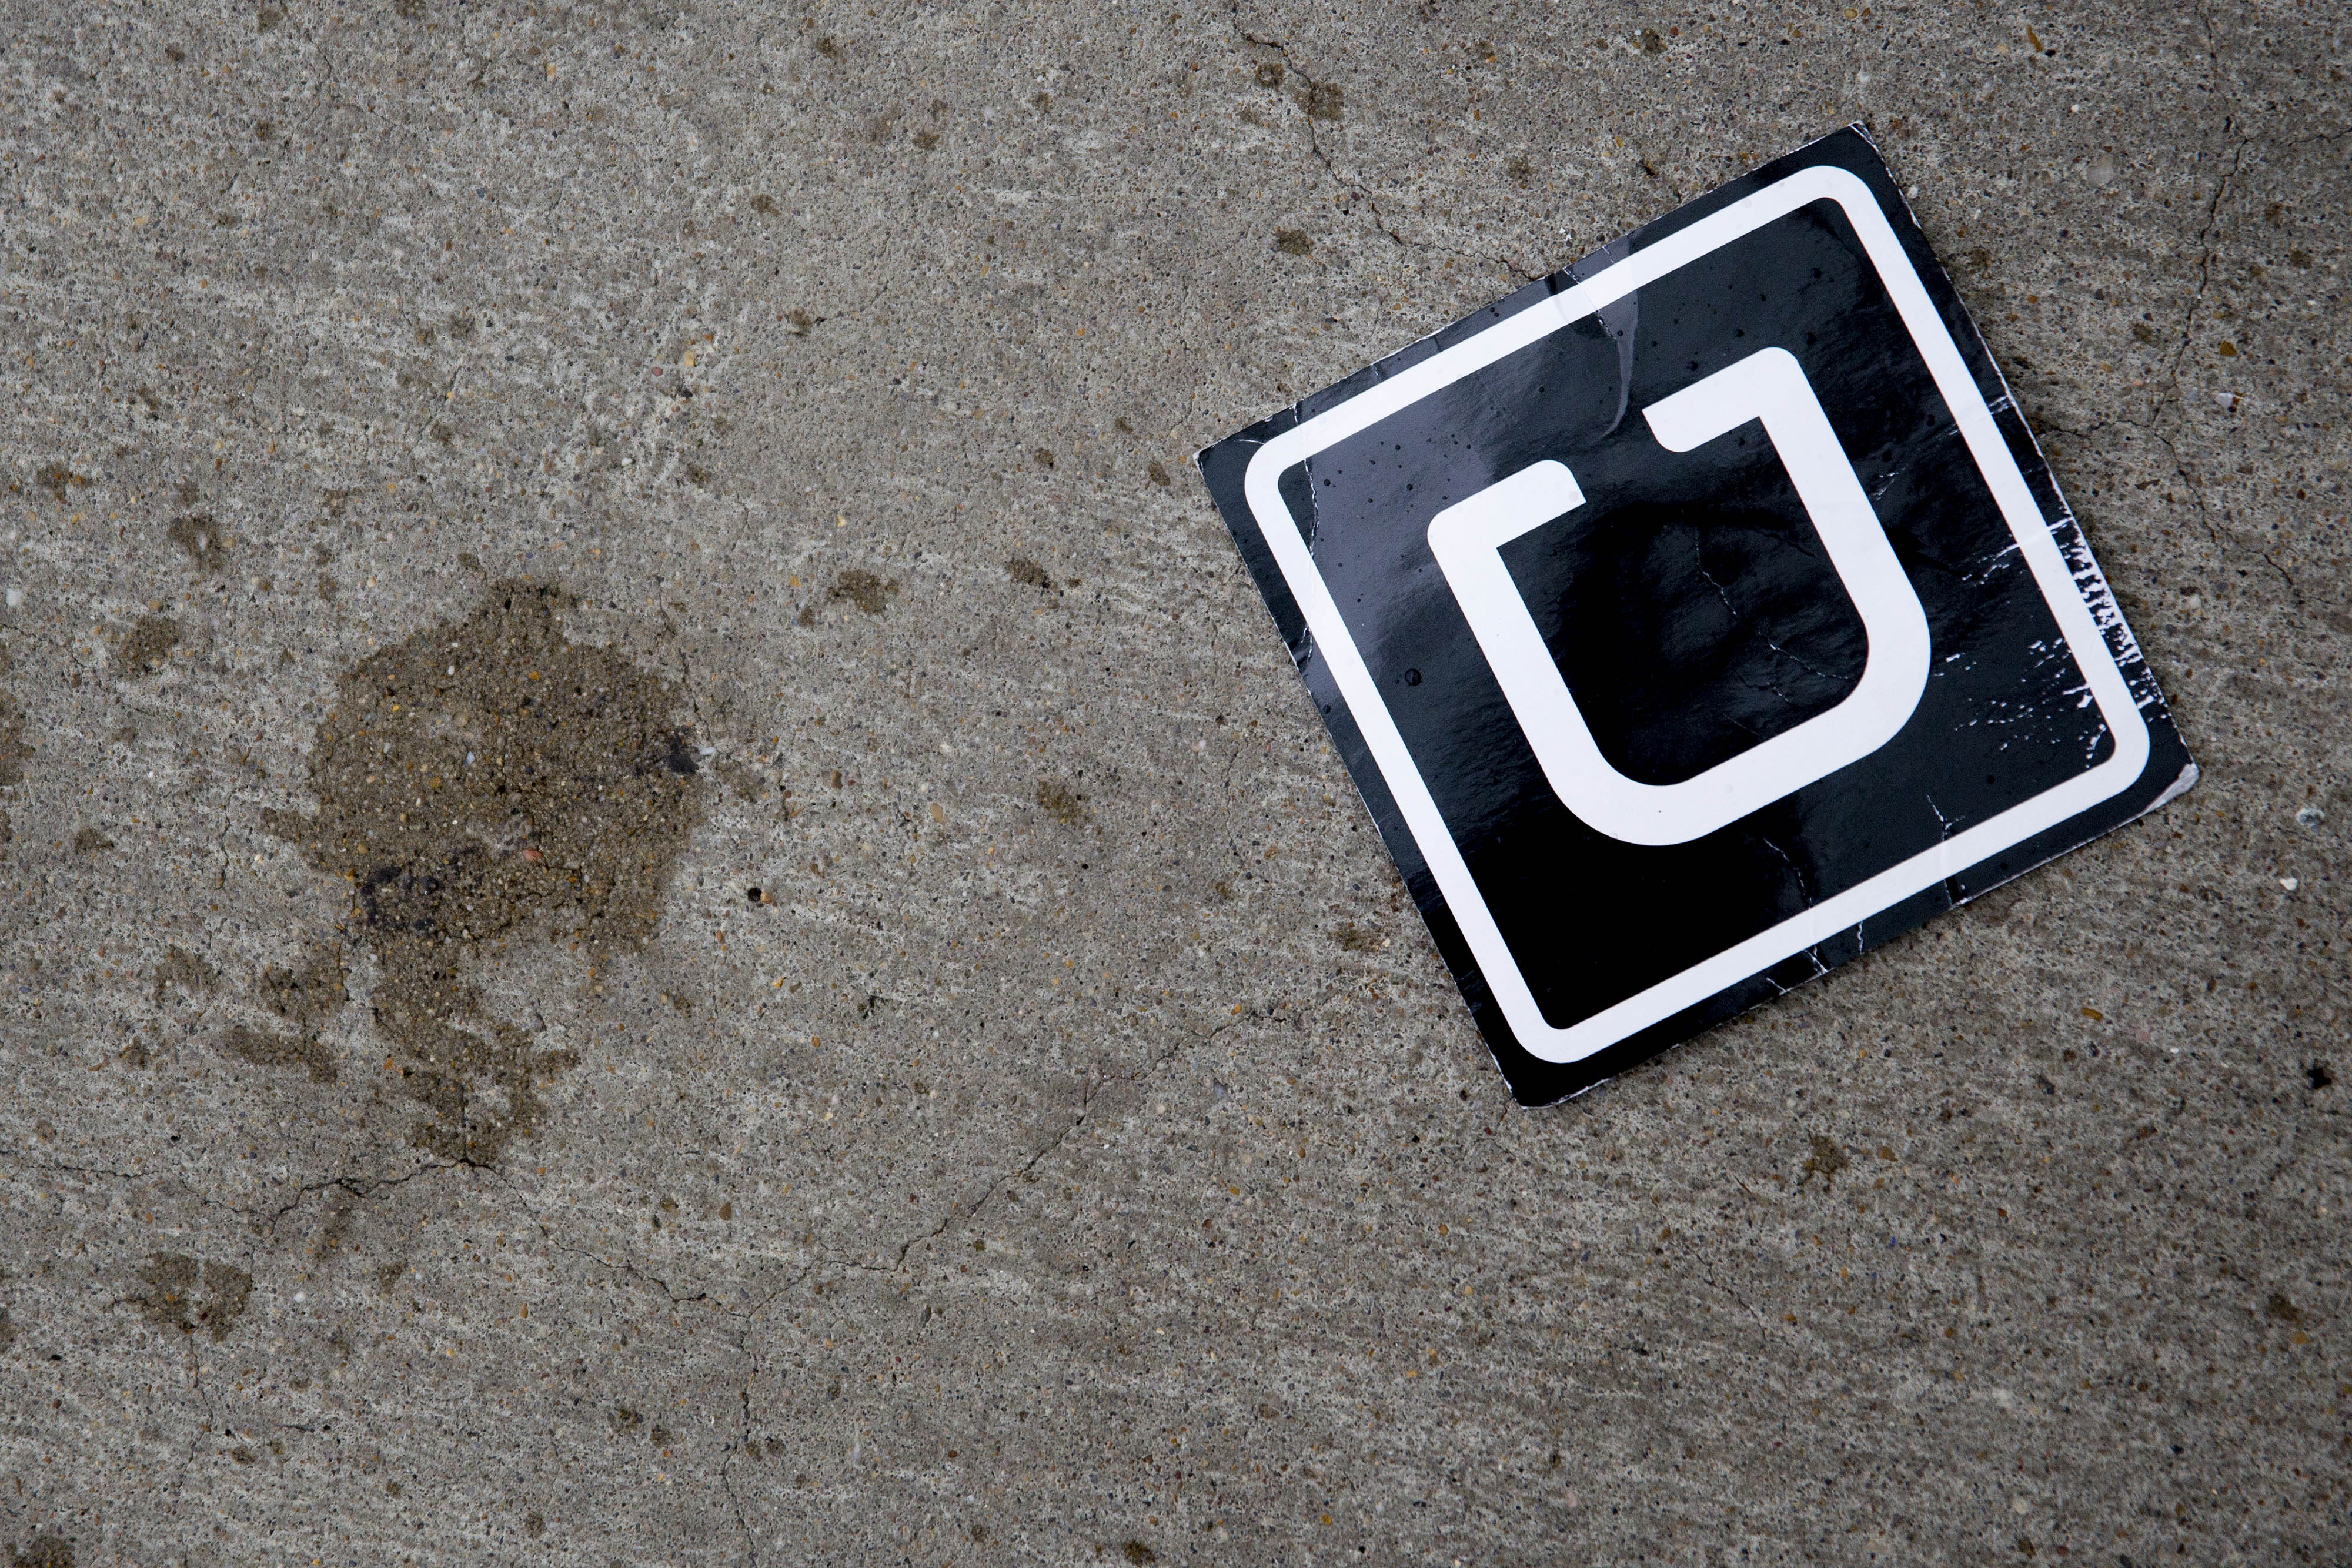 The Uber Technologies Inc. logo is seen on the ground at Ronald Reagan National Airport (DCA) in Washington, D.C. on Nov. 26, 2014. (Andrew Harrer—Bloomberg/Getty Images)